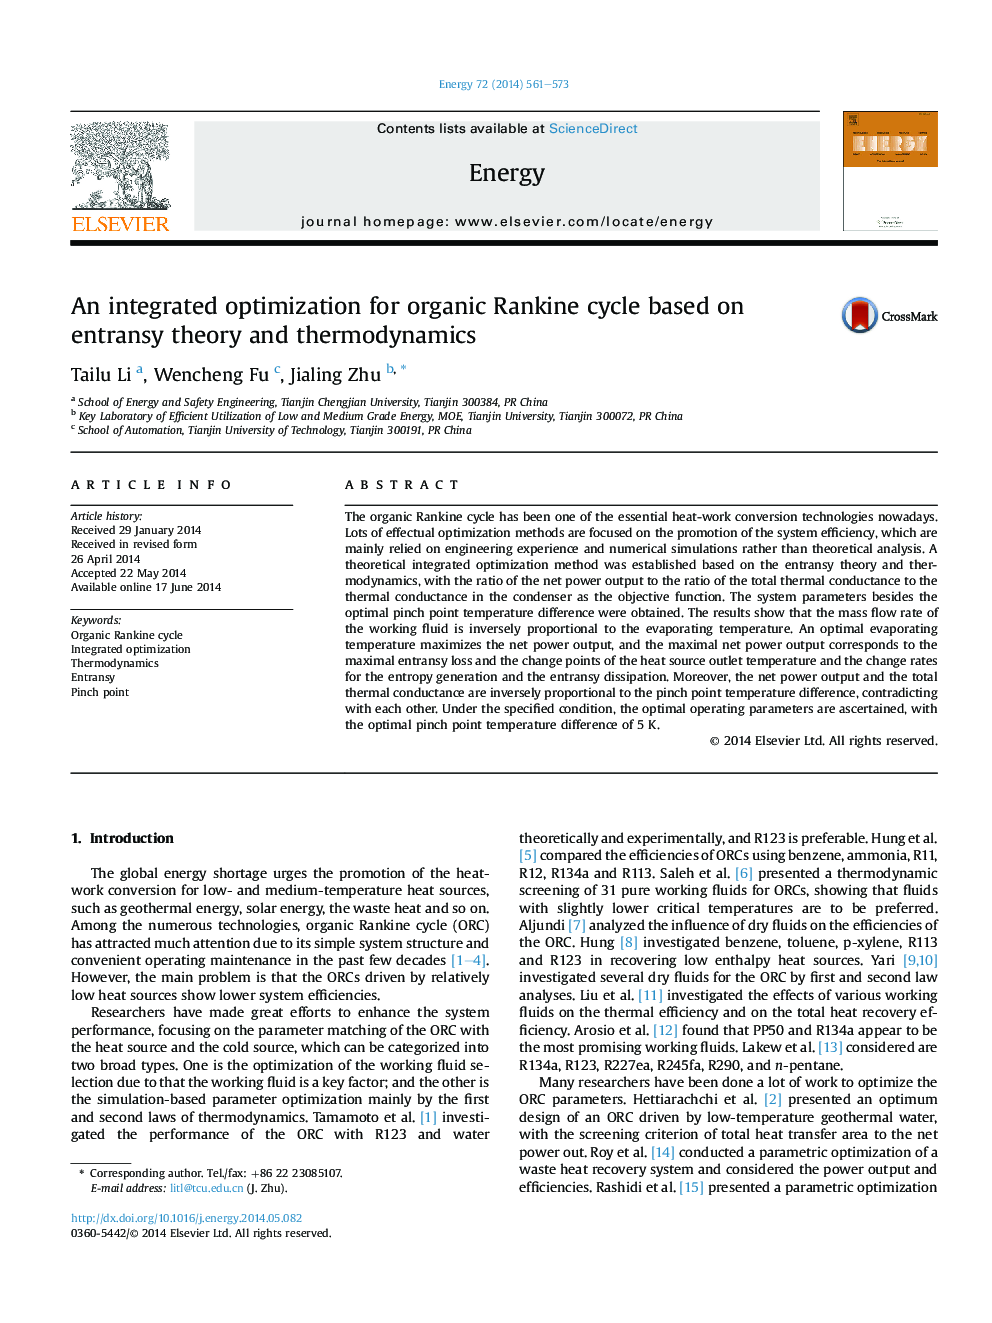 An integrated optimization for organic Rankine cycle based on entransy theory and thermodynamics